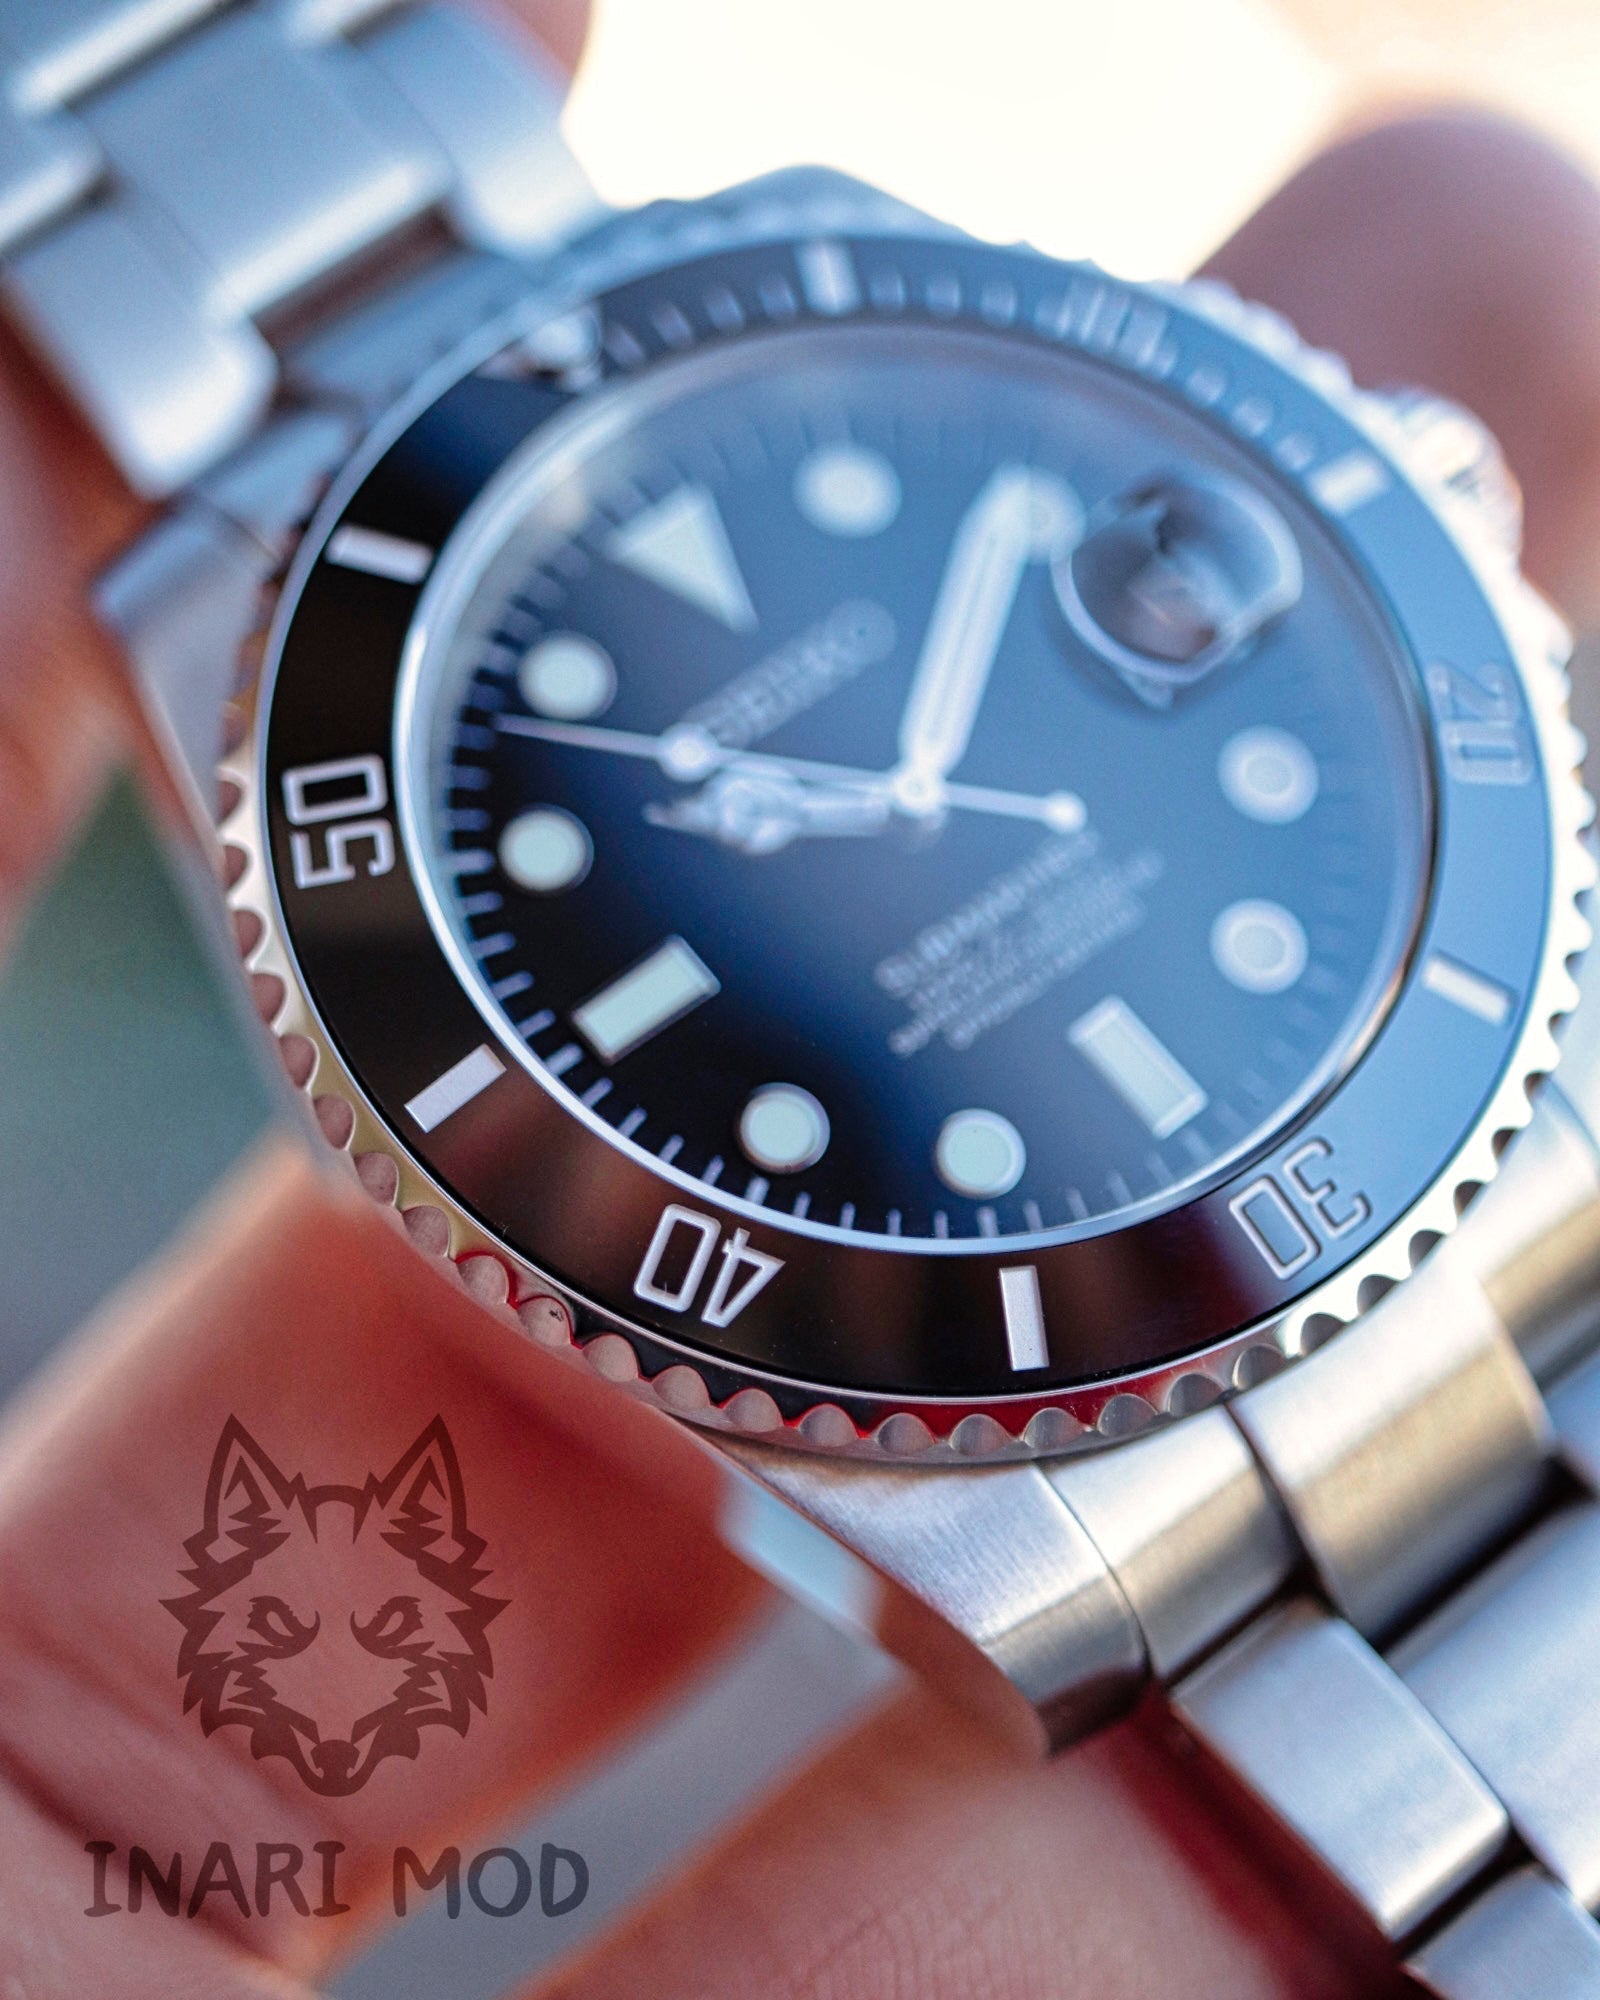 Seiko Mod Submariner from Inarimod for 299.90